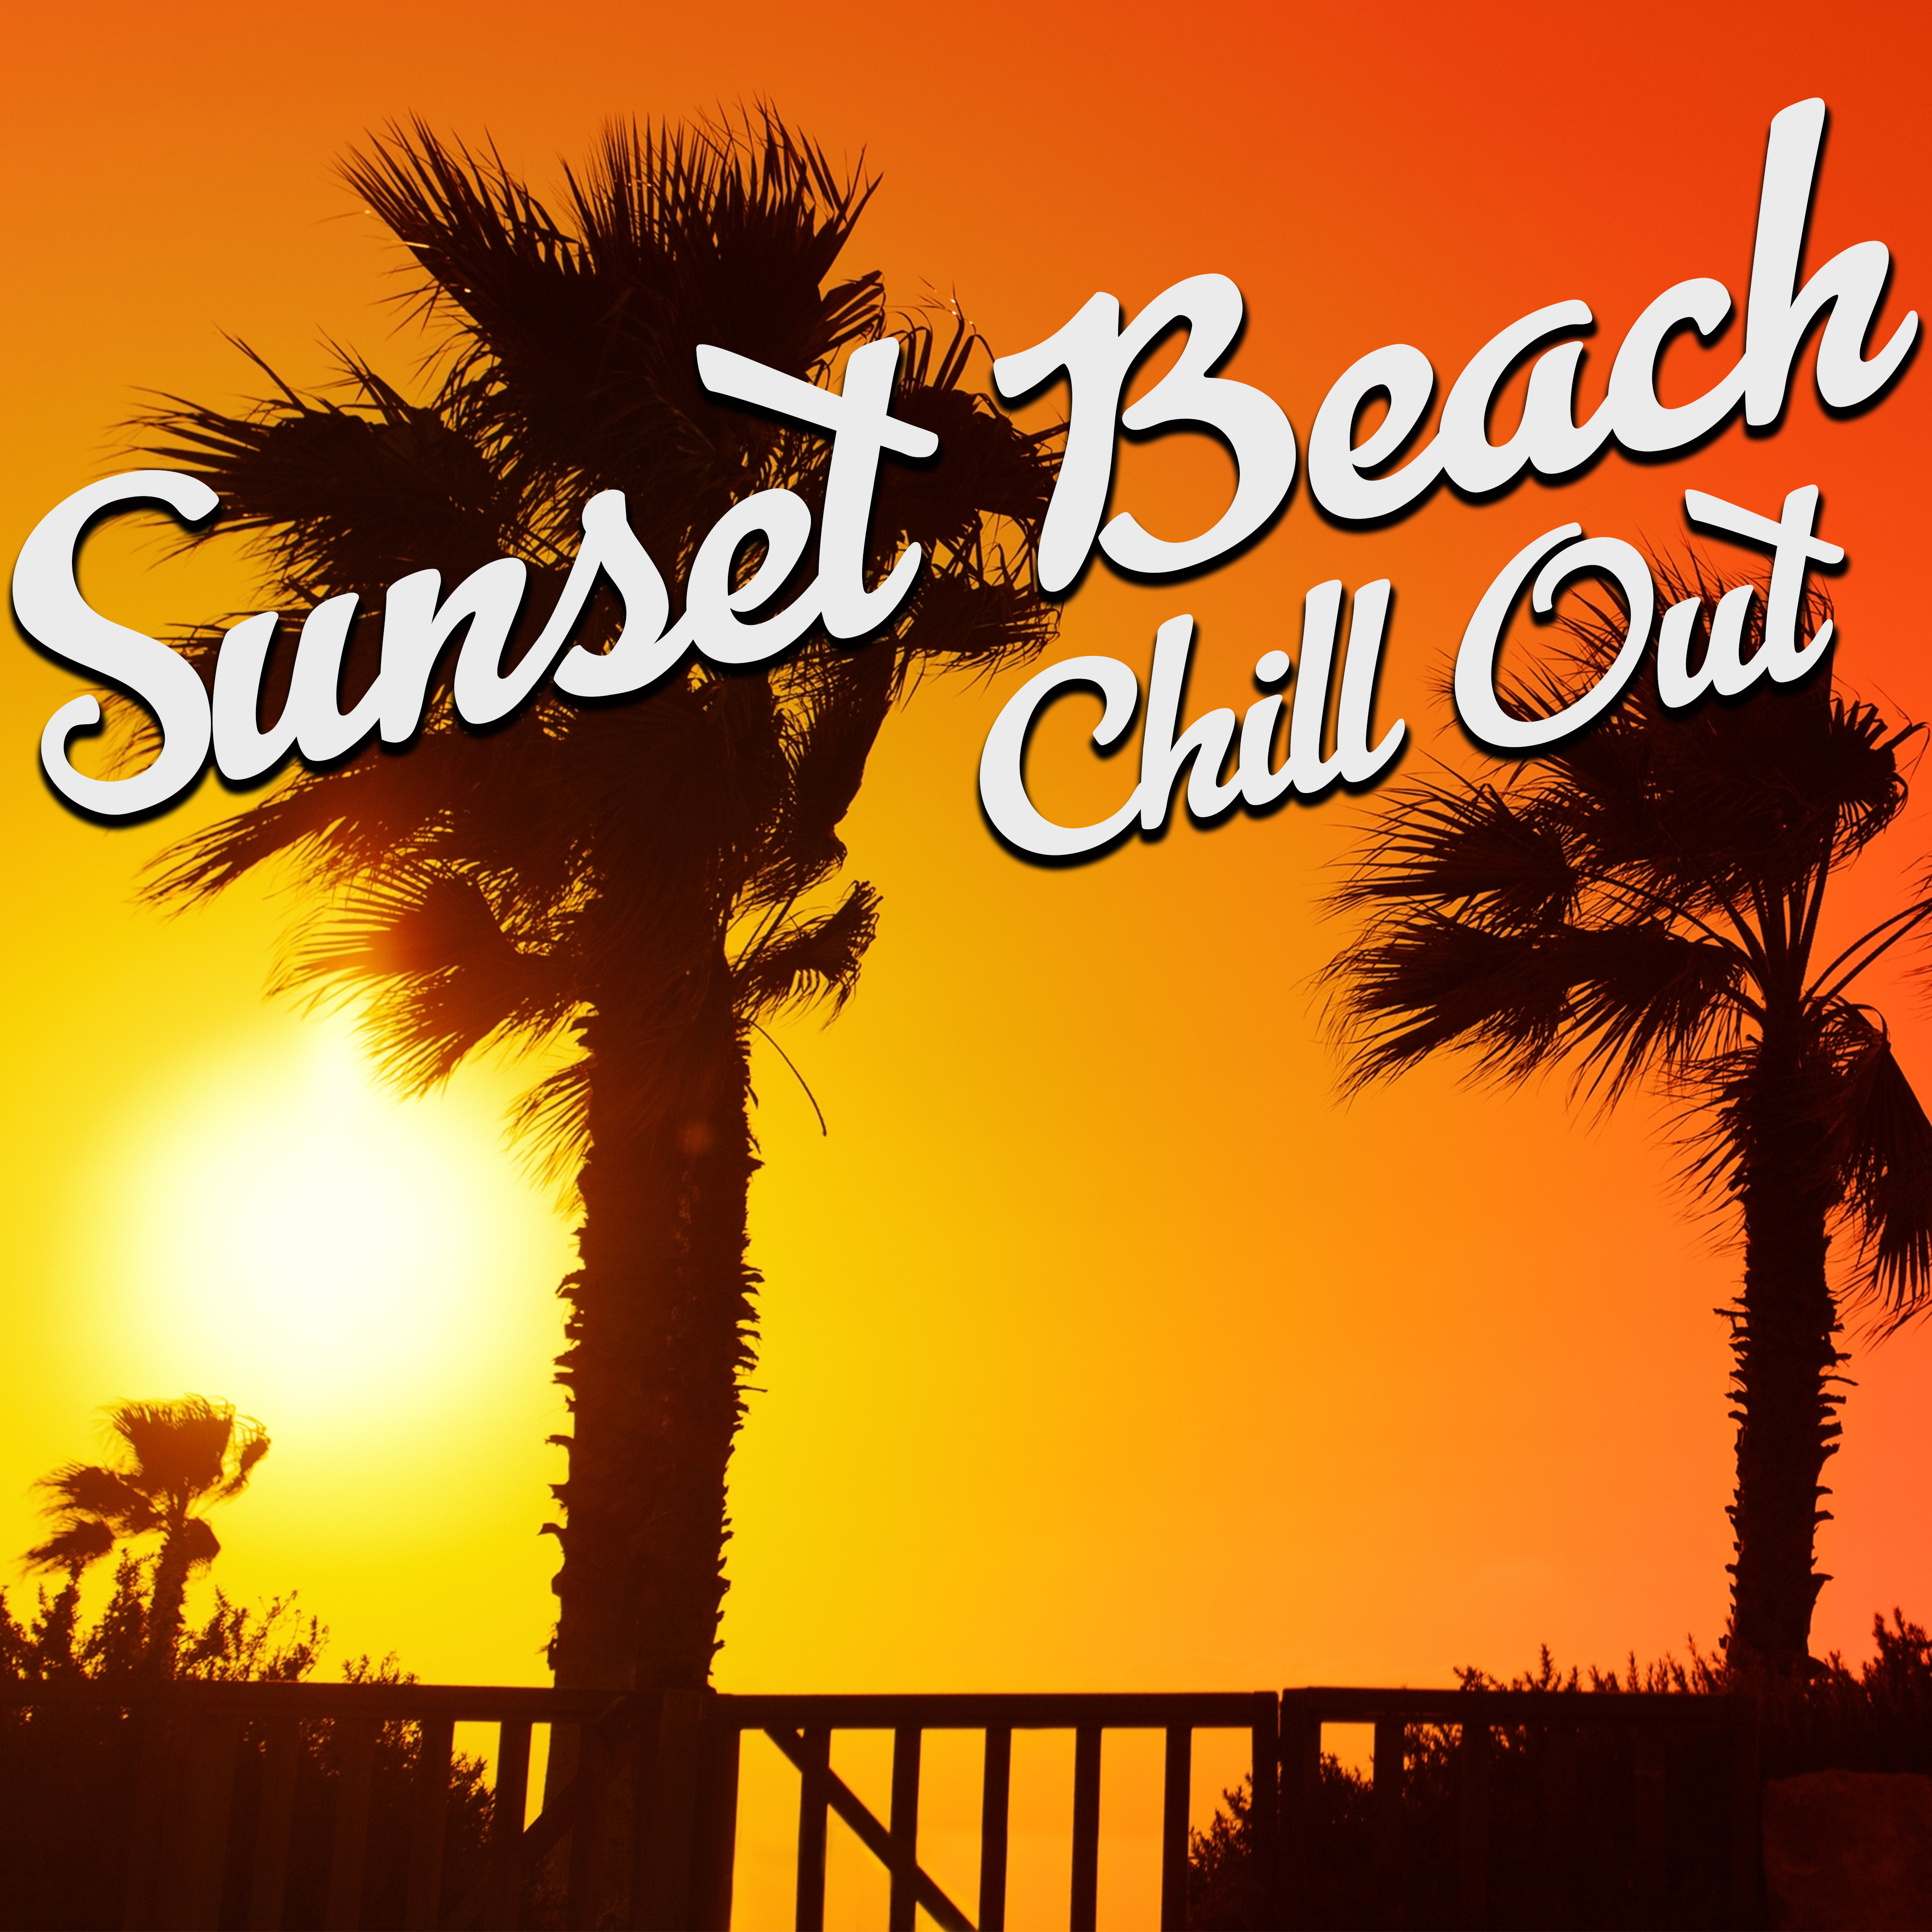 Sunset Beach Chill Out  Relaxing Chill Out Music, Summer Sun, Holiday Sounds, Chilled Waves